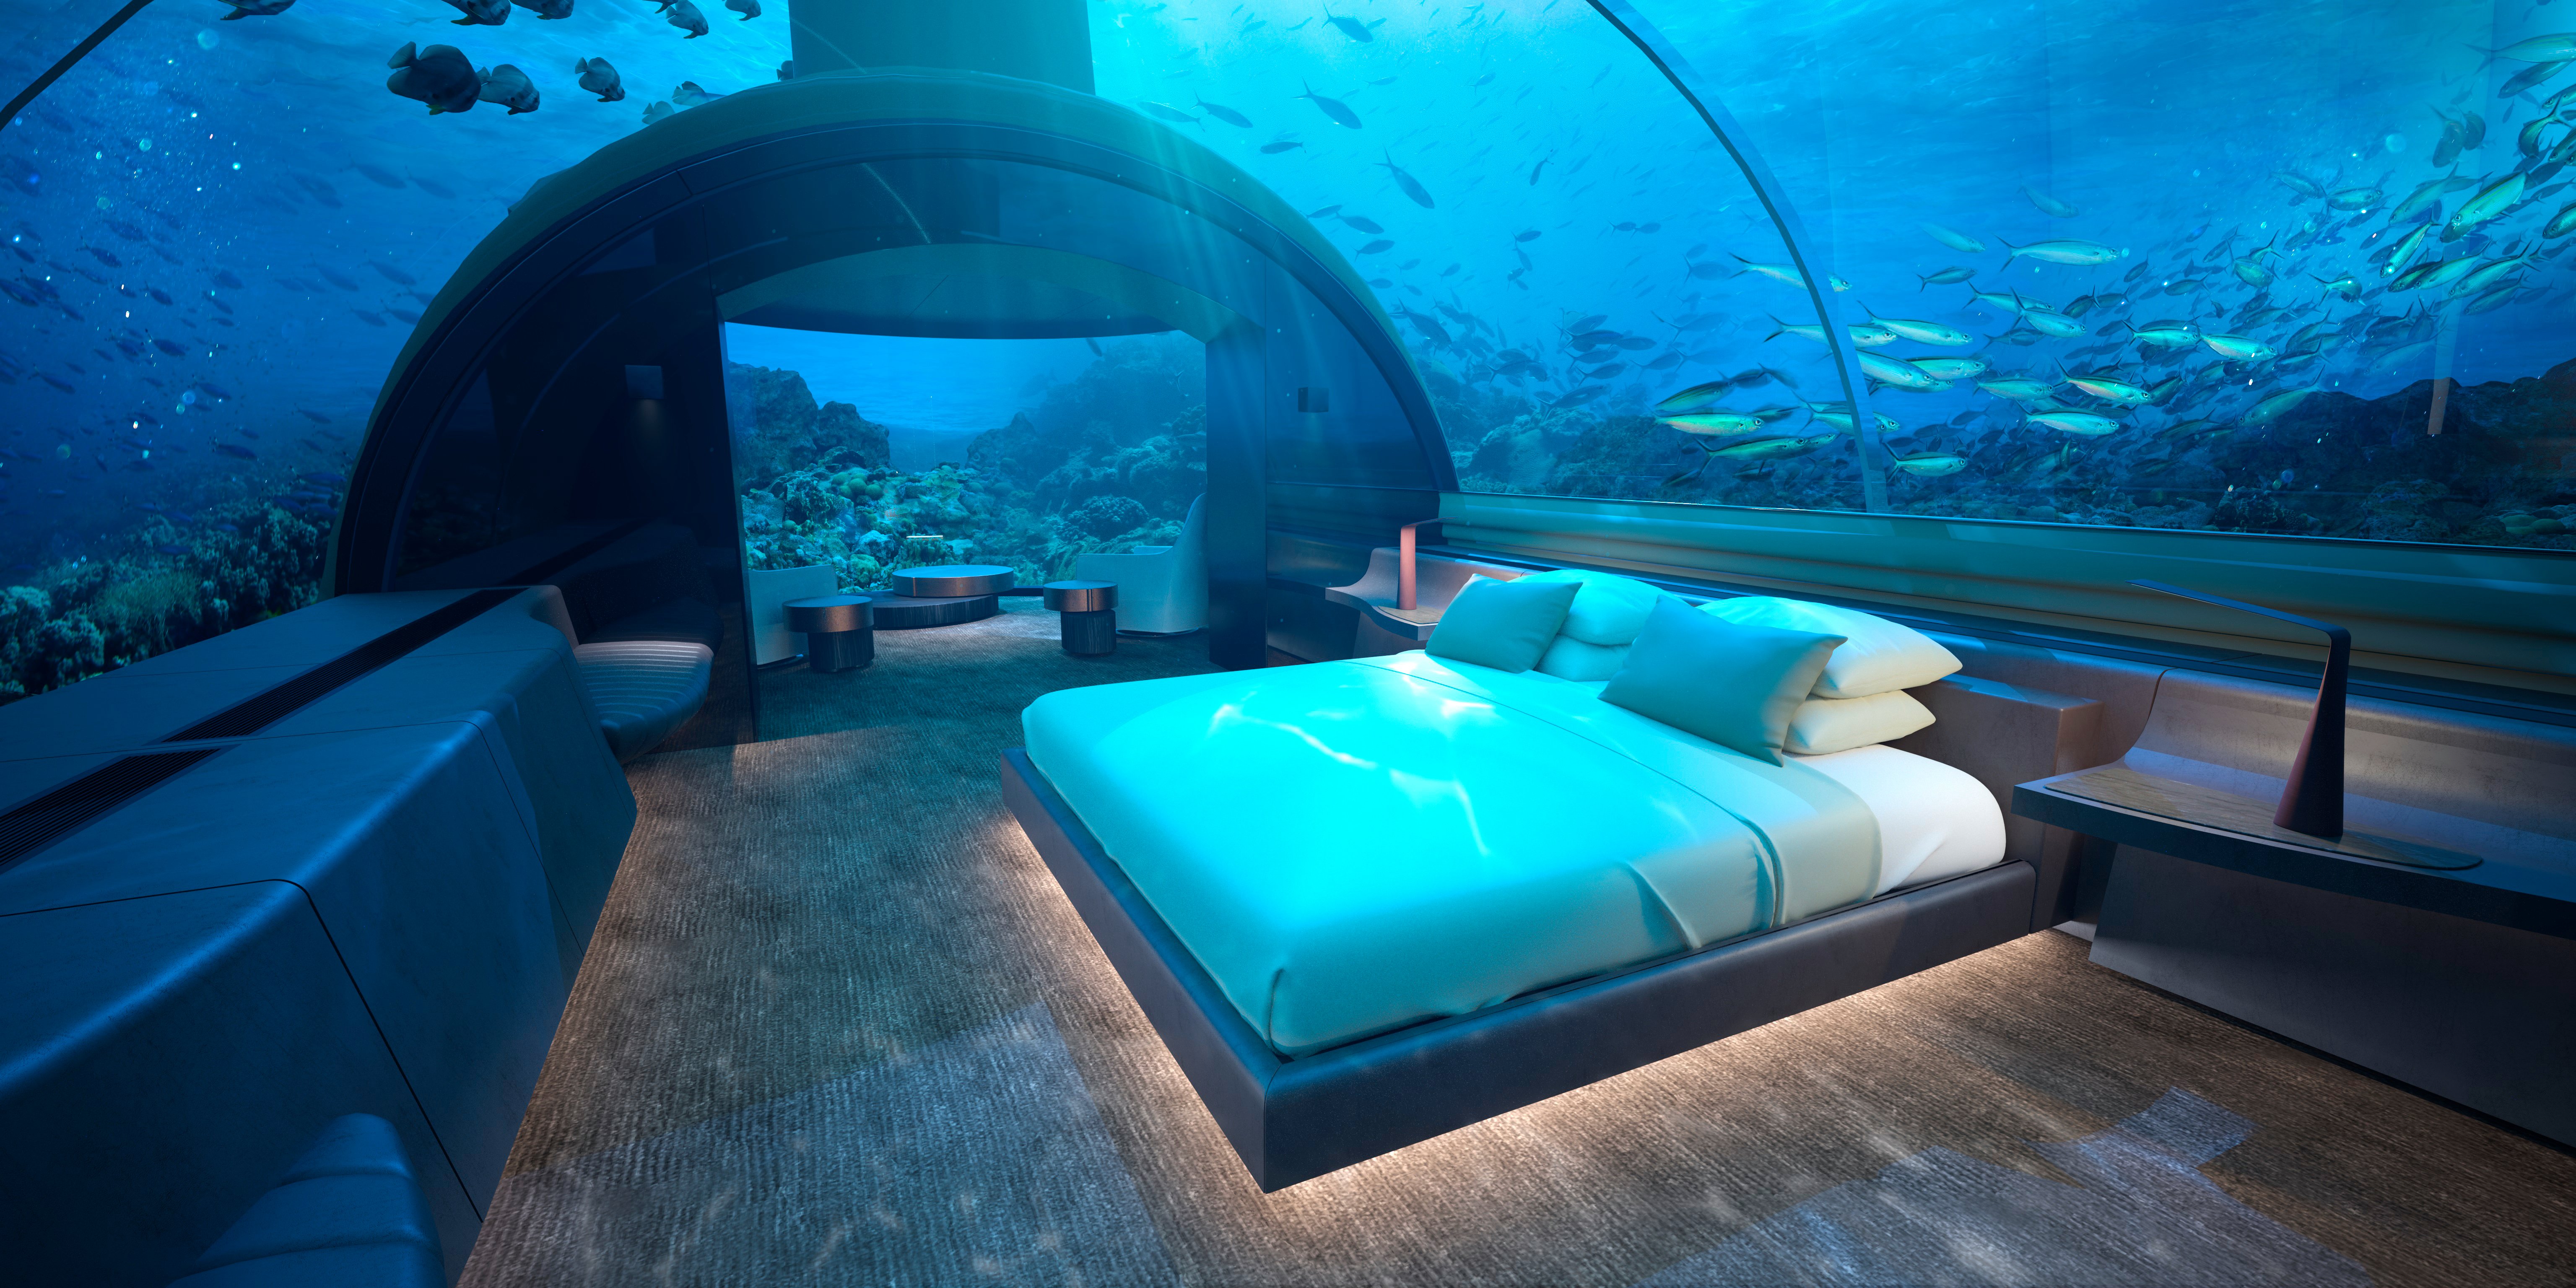 The new Conrad Maldives Rangali Island Residence is scheduled to begin operating in the fourth quarter of 2018 following a 